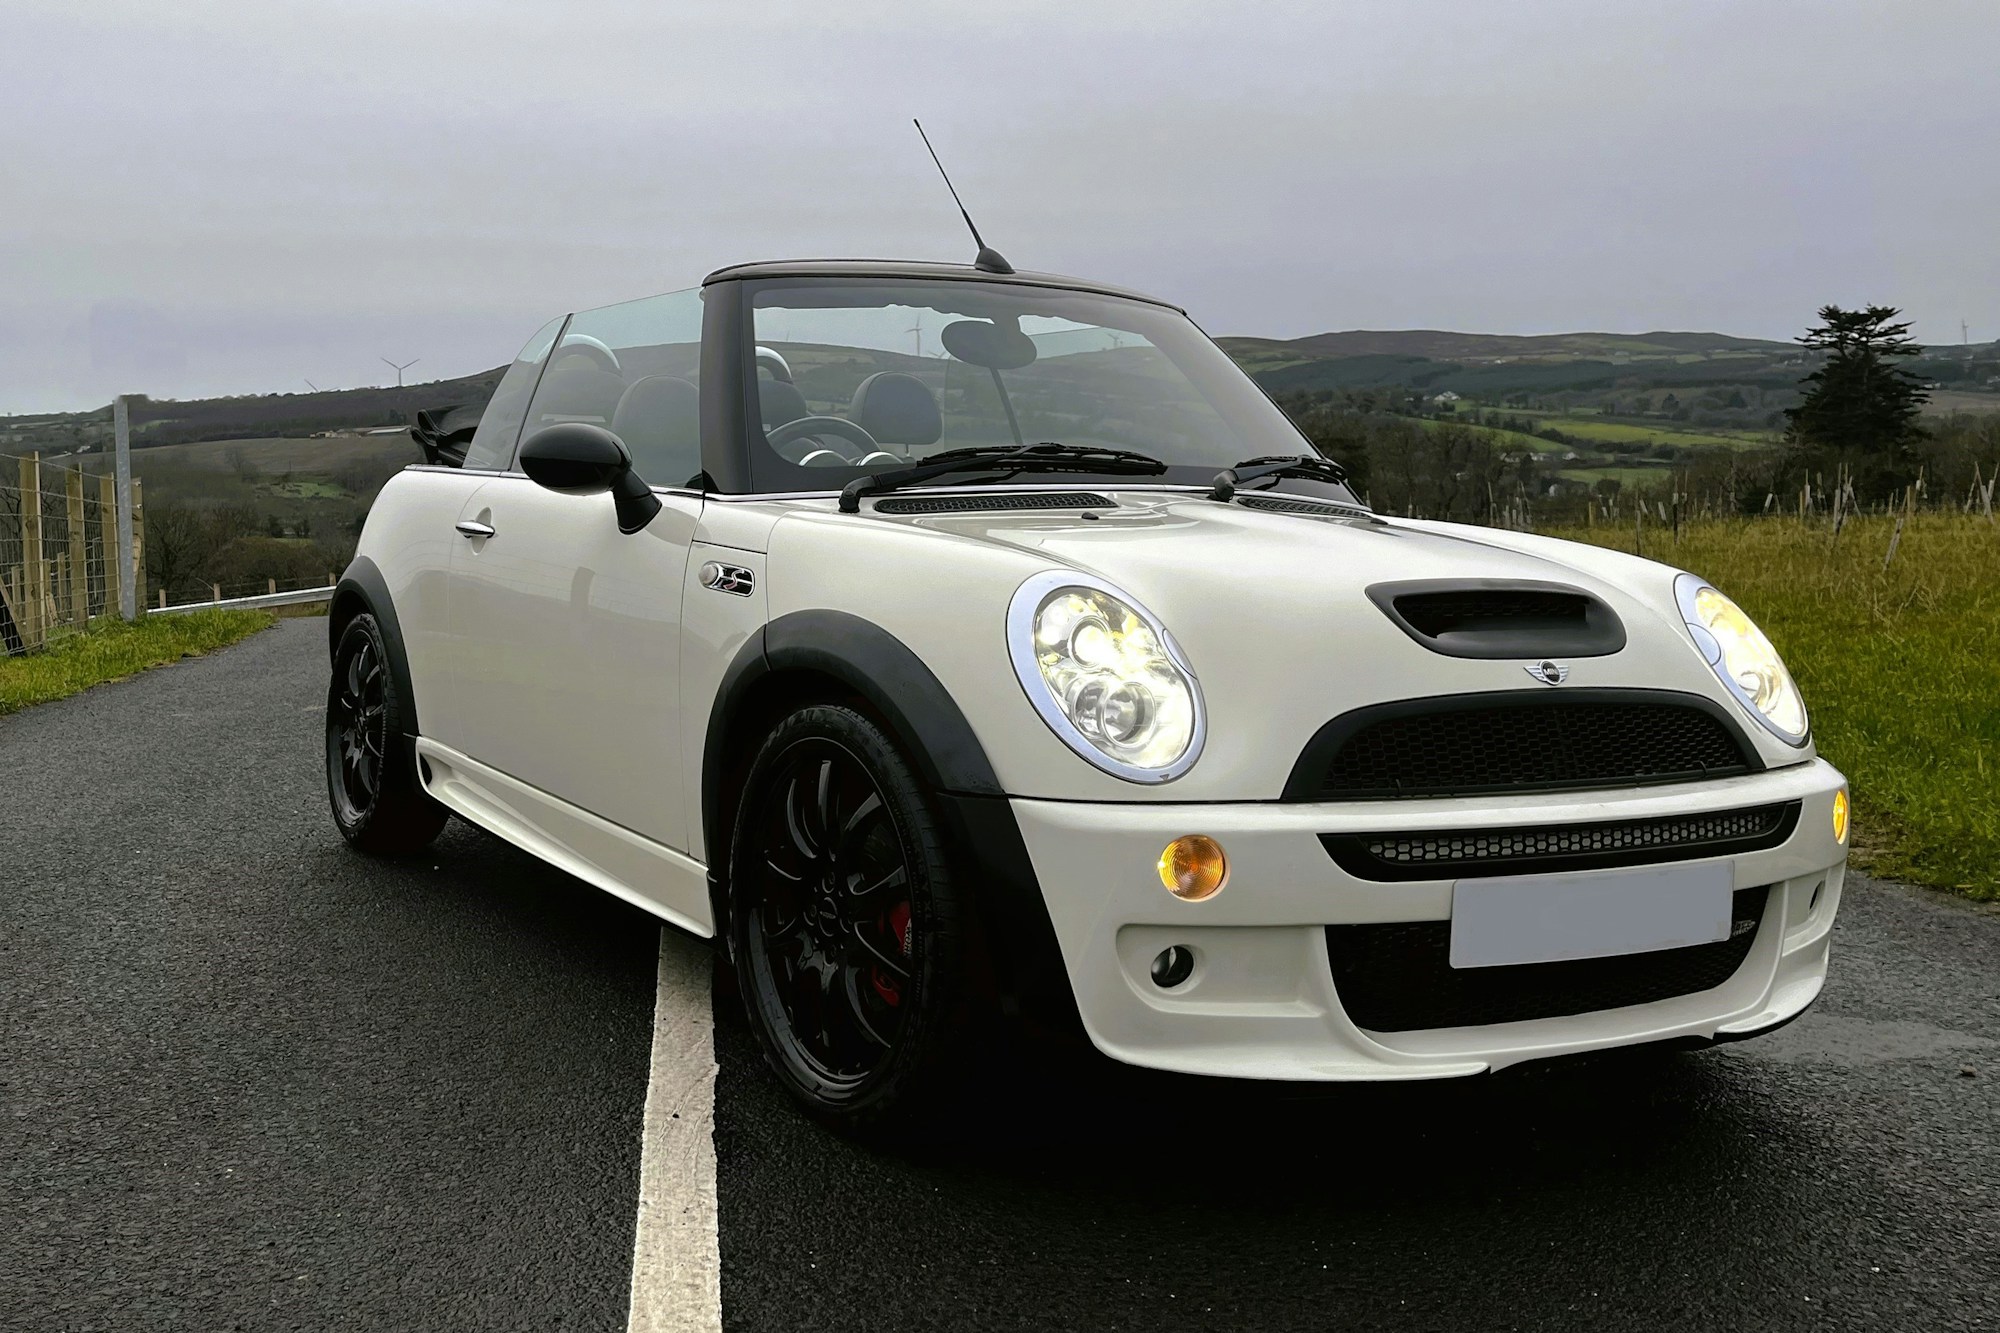 2007 MINI Cooper S: What's It Like to Live With?